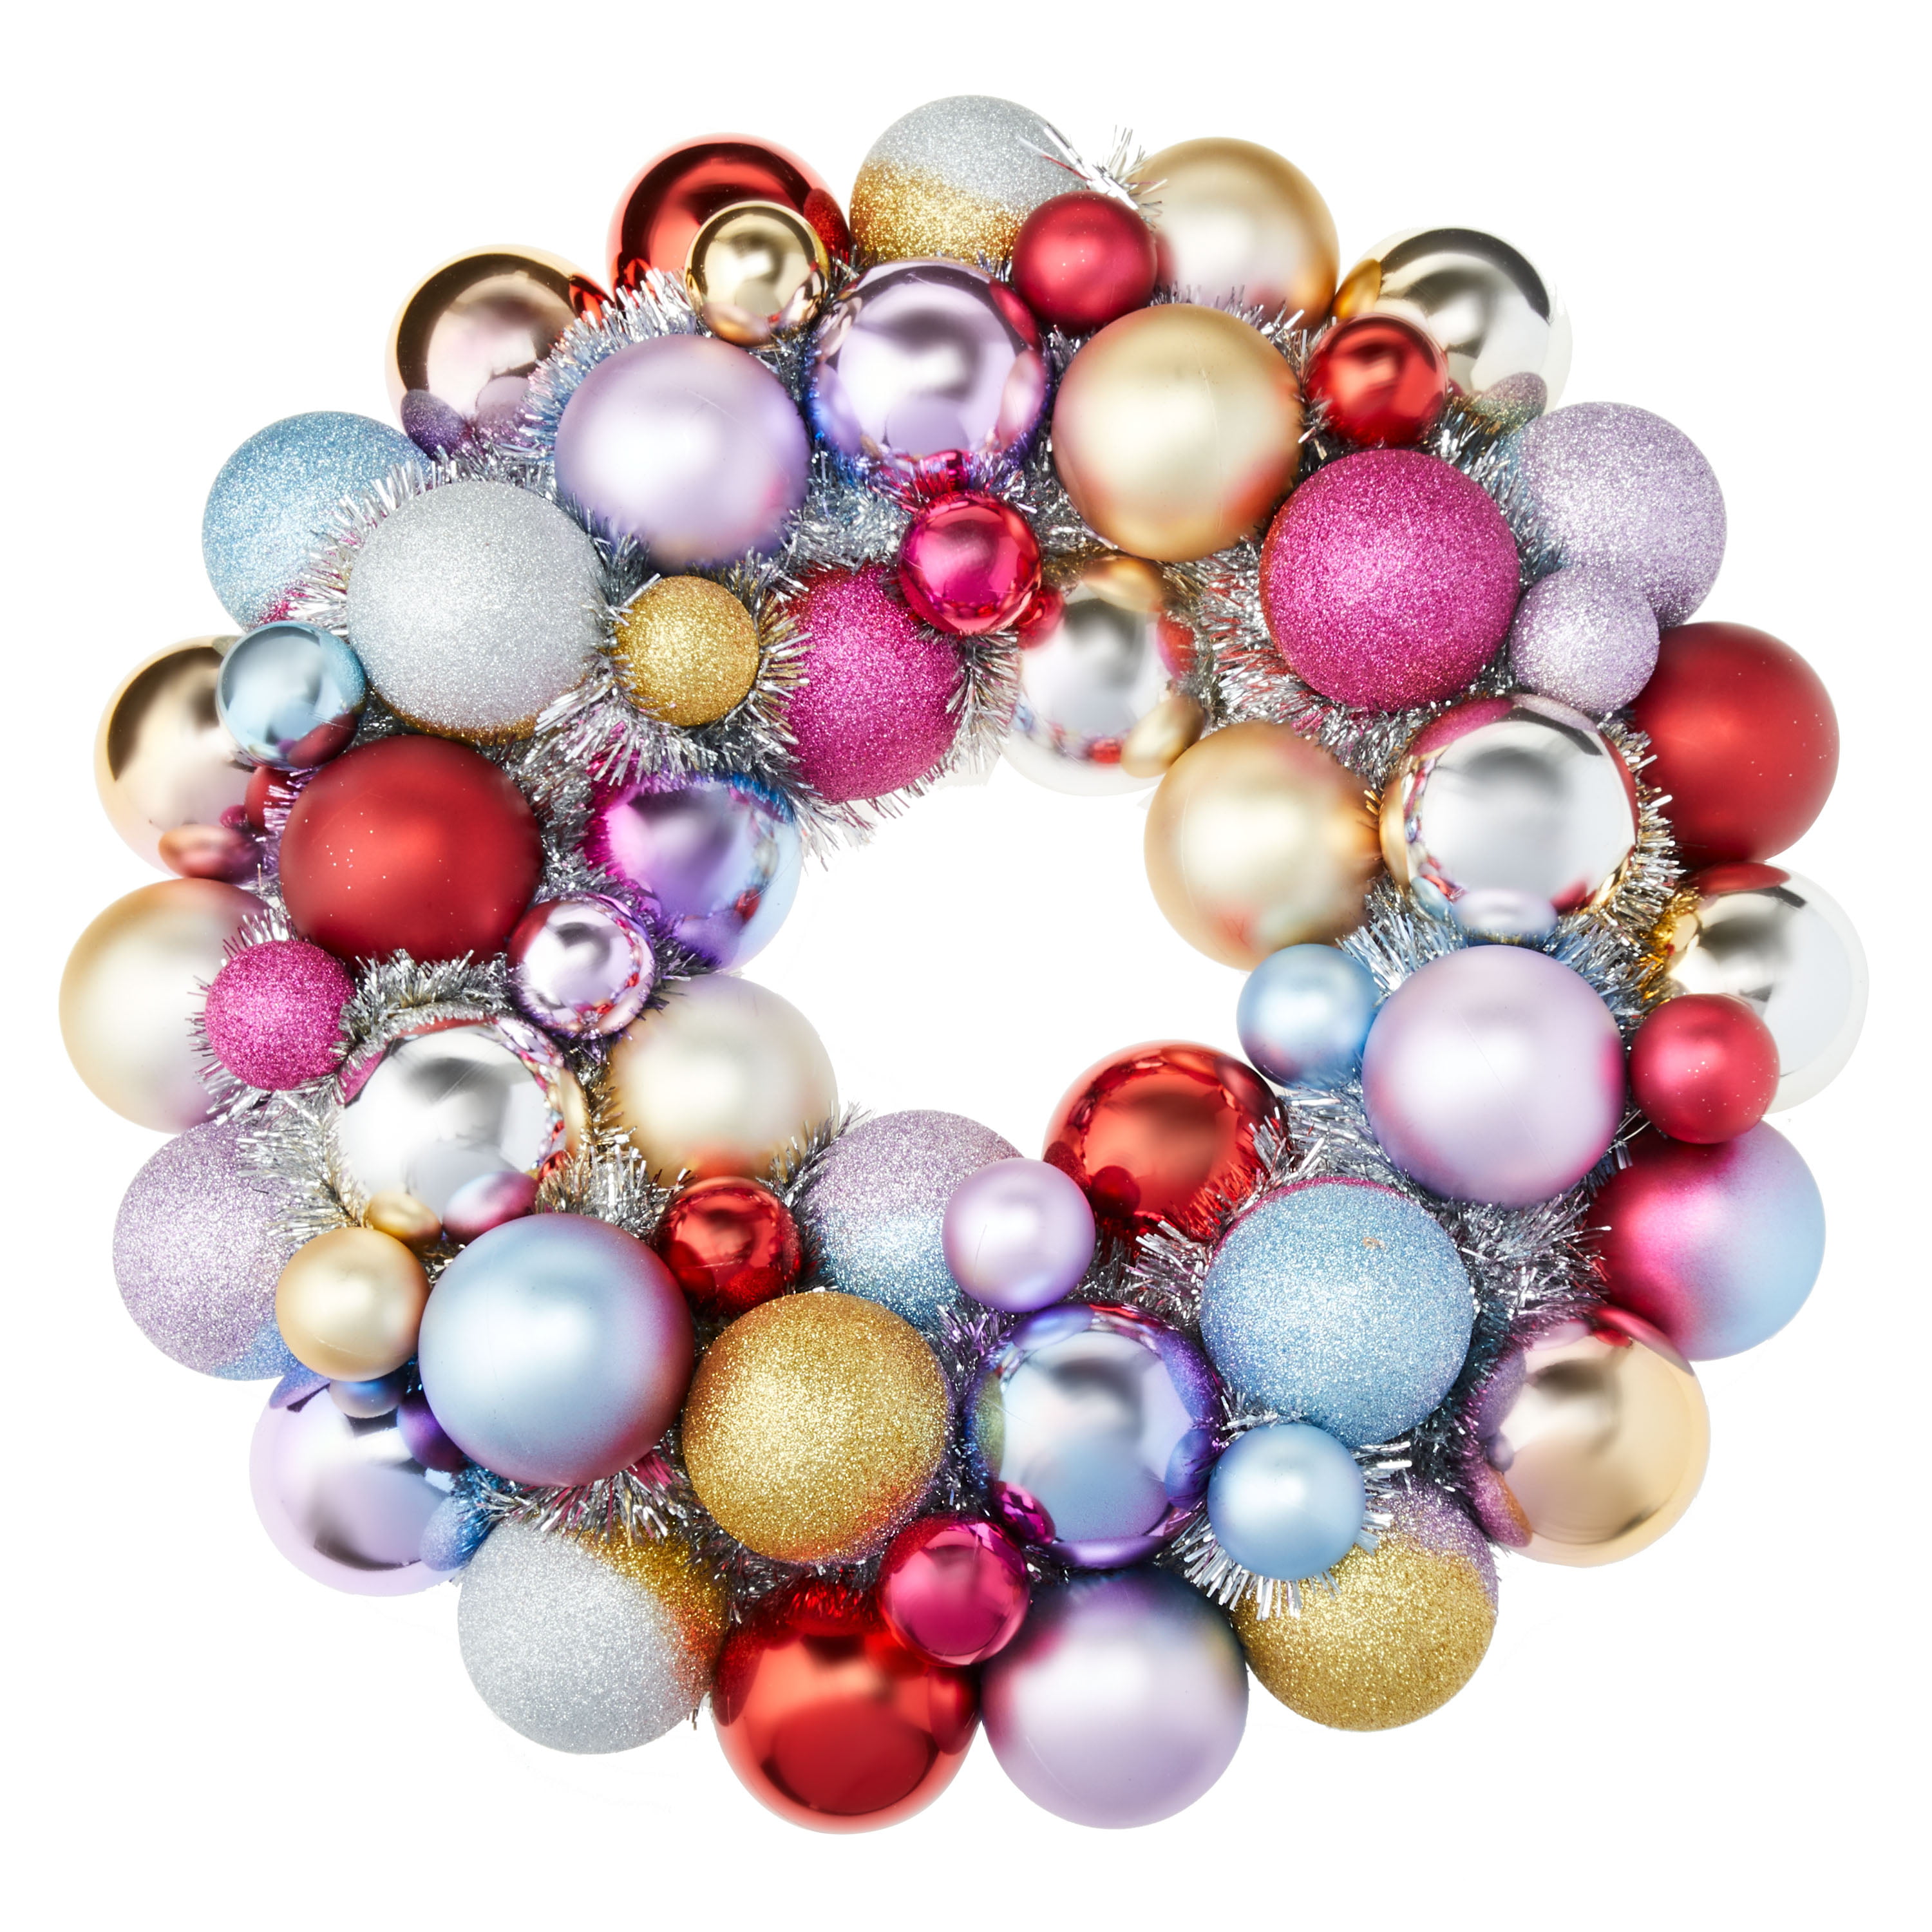 Packed Party Shatterproof Ornaments Christmas Wreath, 18-Inch - Walmart.com